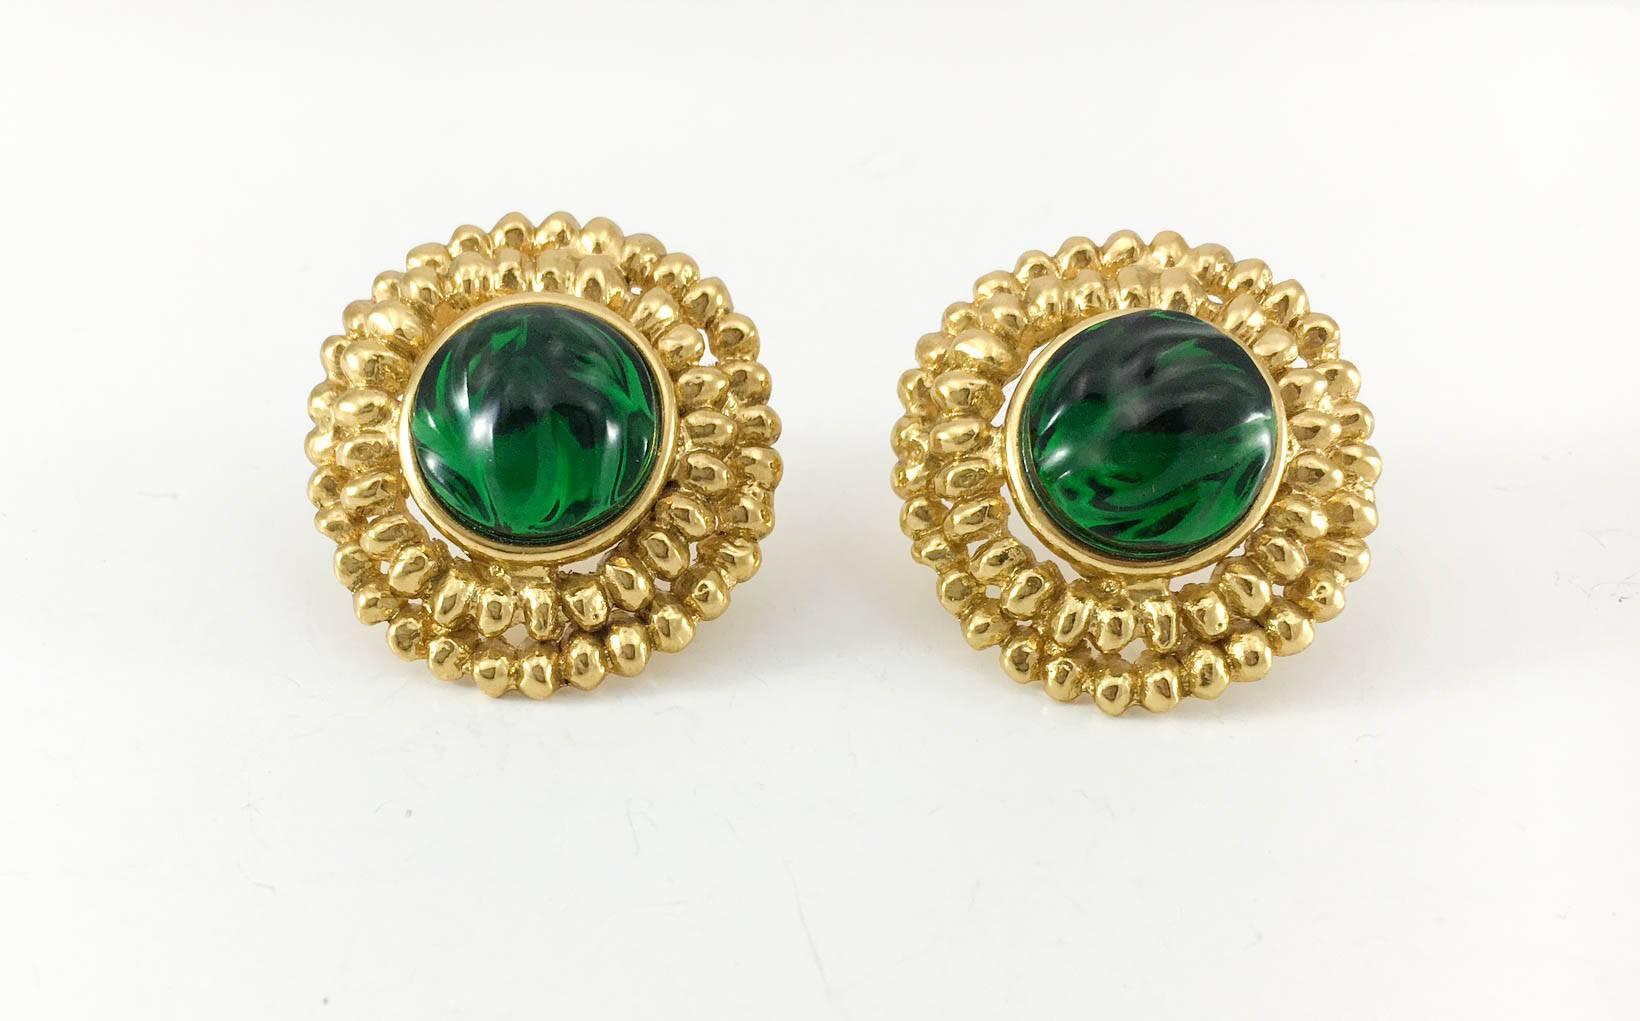 Yves Saint Laurent Green Gripoix Gold-Plated Earrings, by Goossens - 1980s In Excellent Condition In London, Chelsea